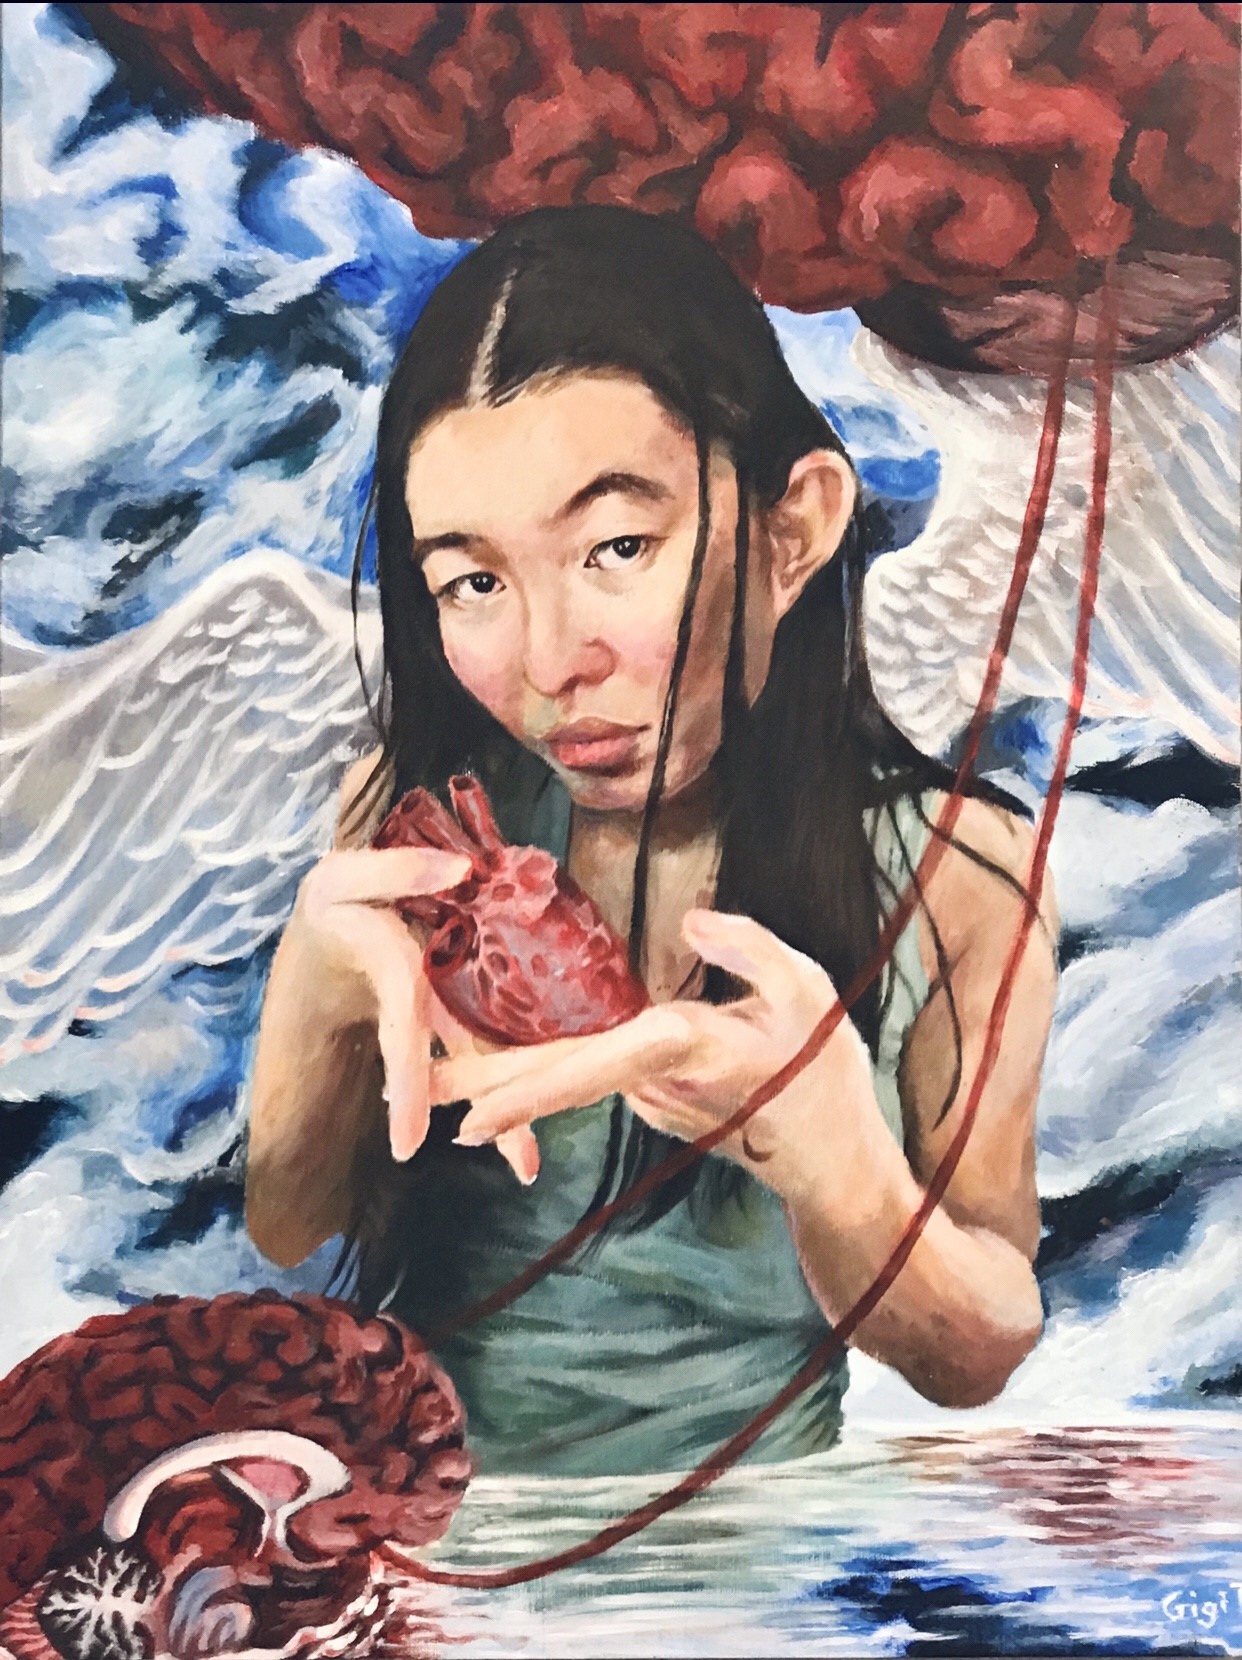 A painting of a young woman with a heart